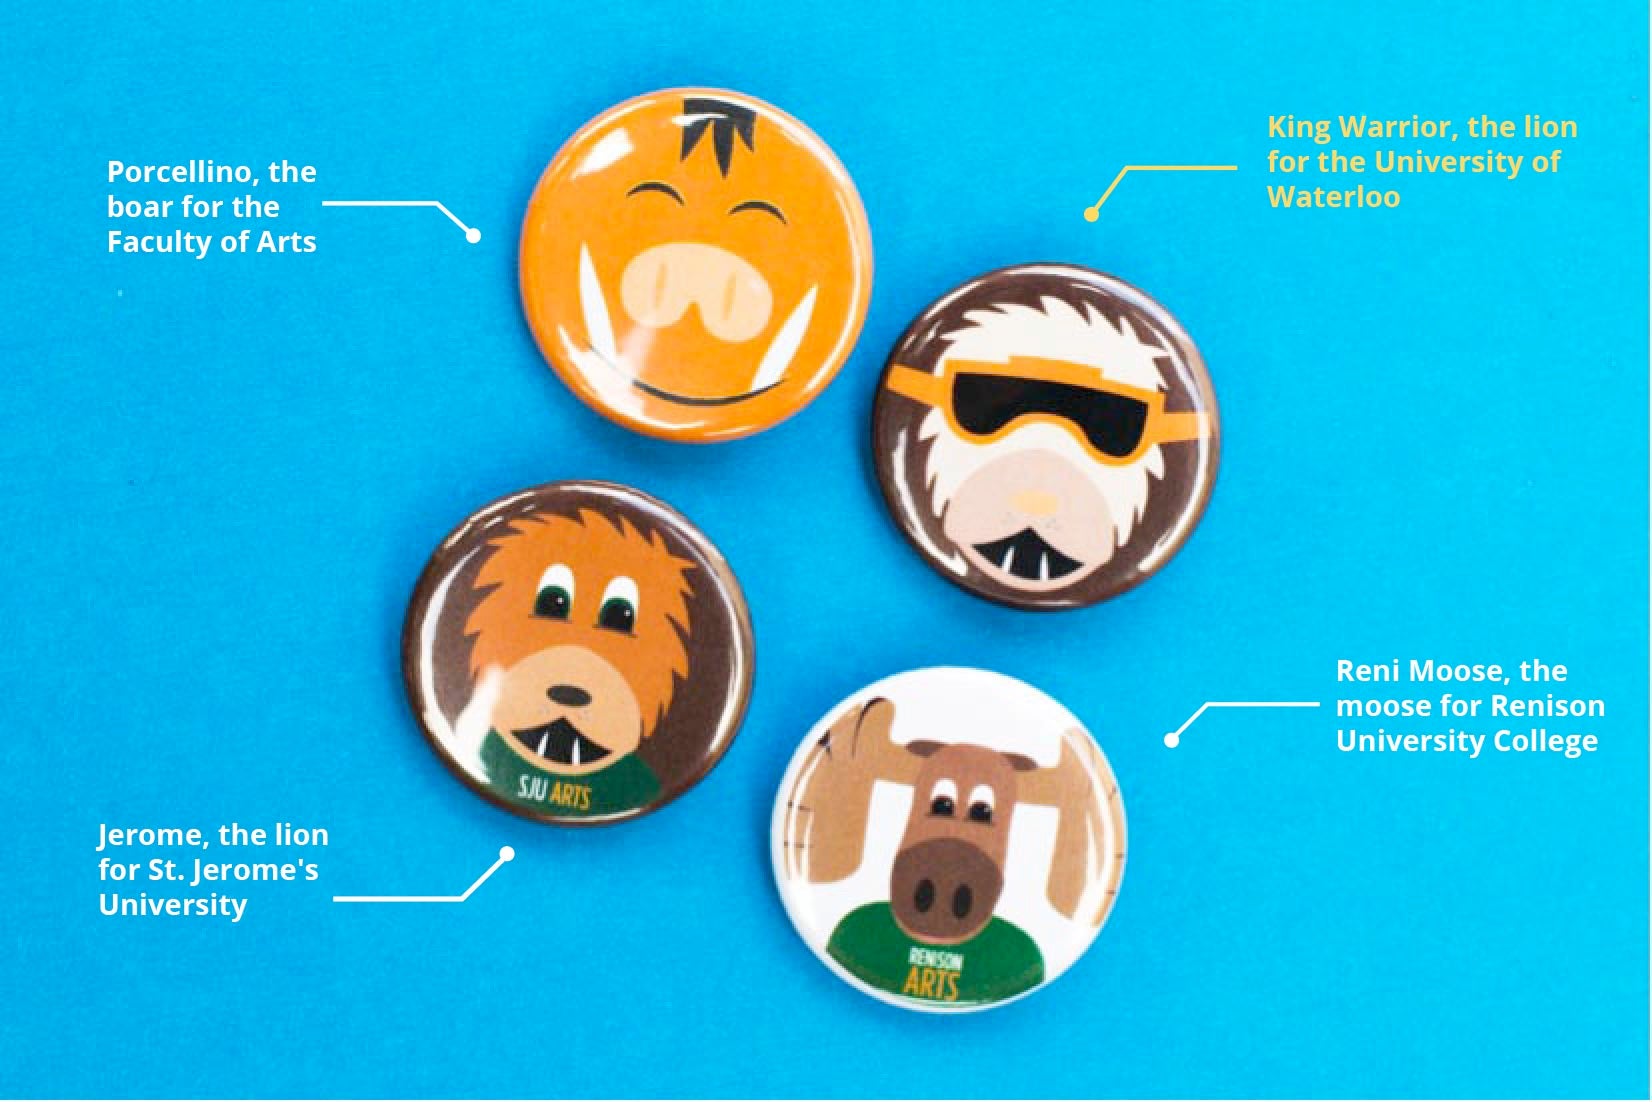 Cartoon button desings showing Porcellino, Renimoose and the St. Jerome's lion